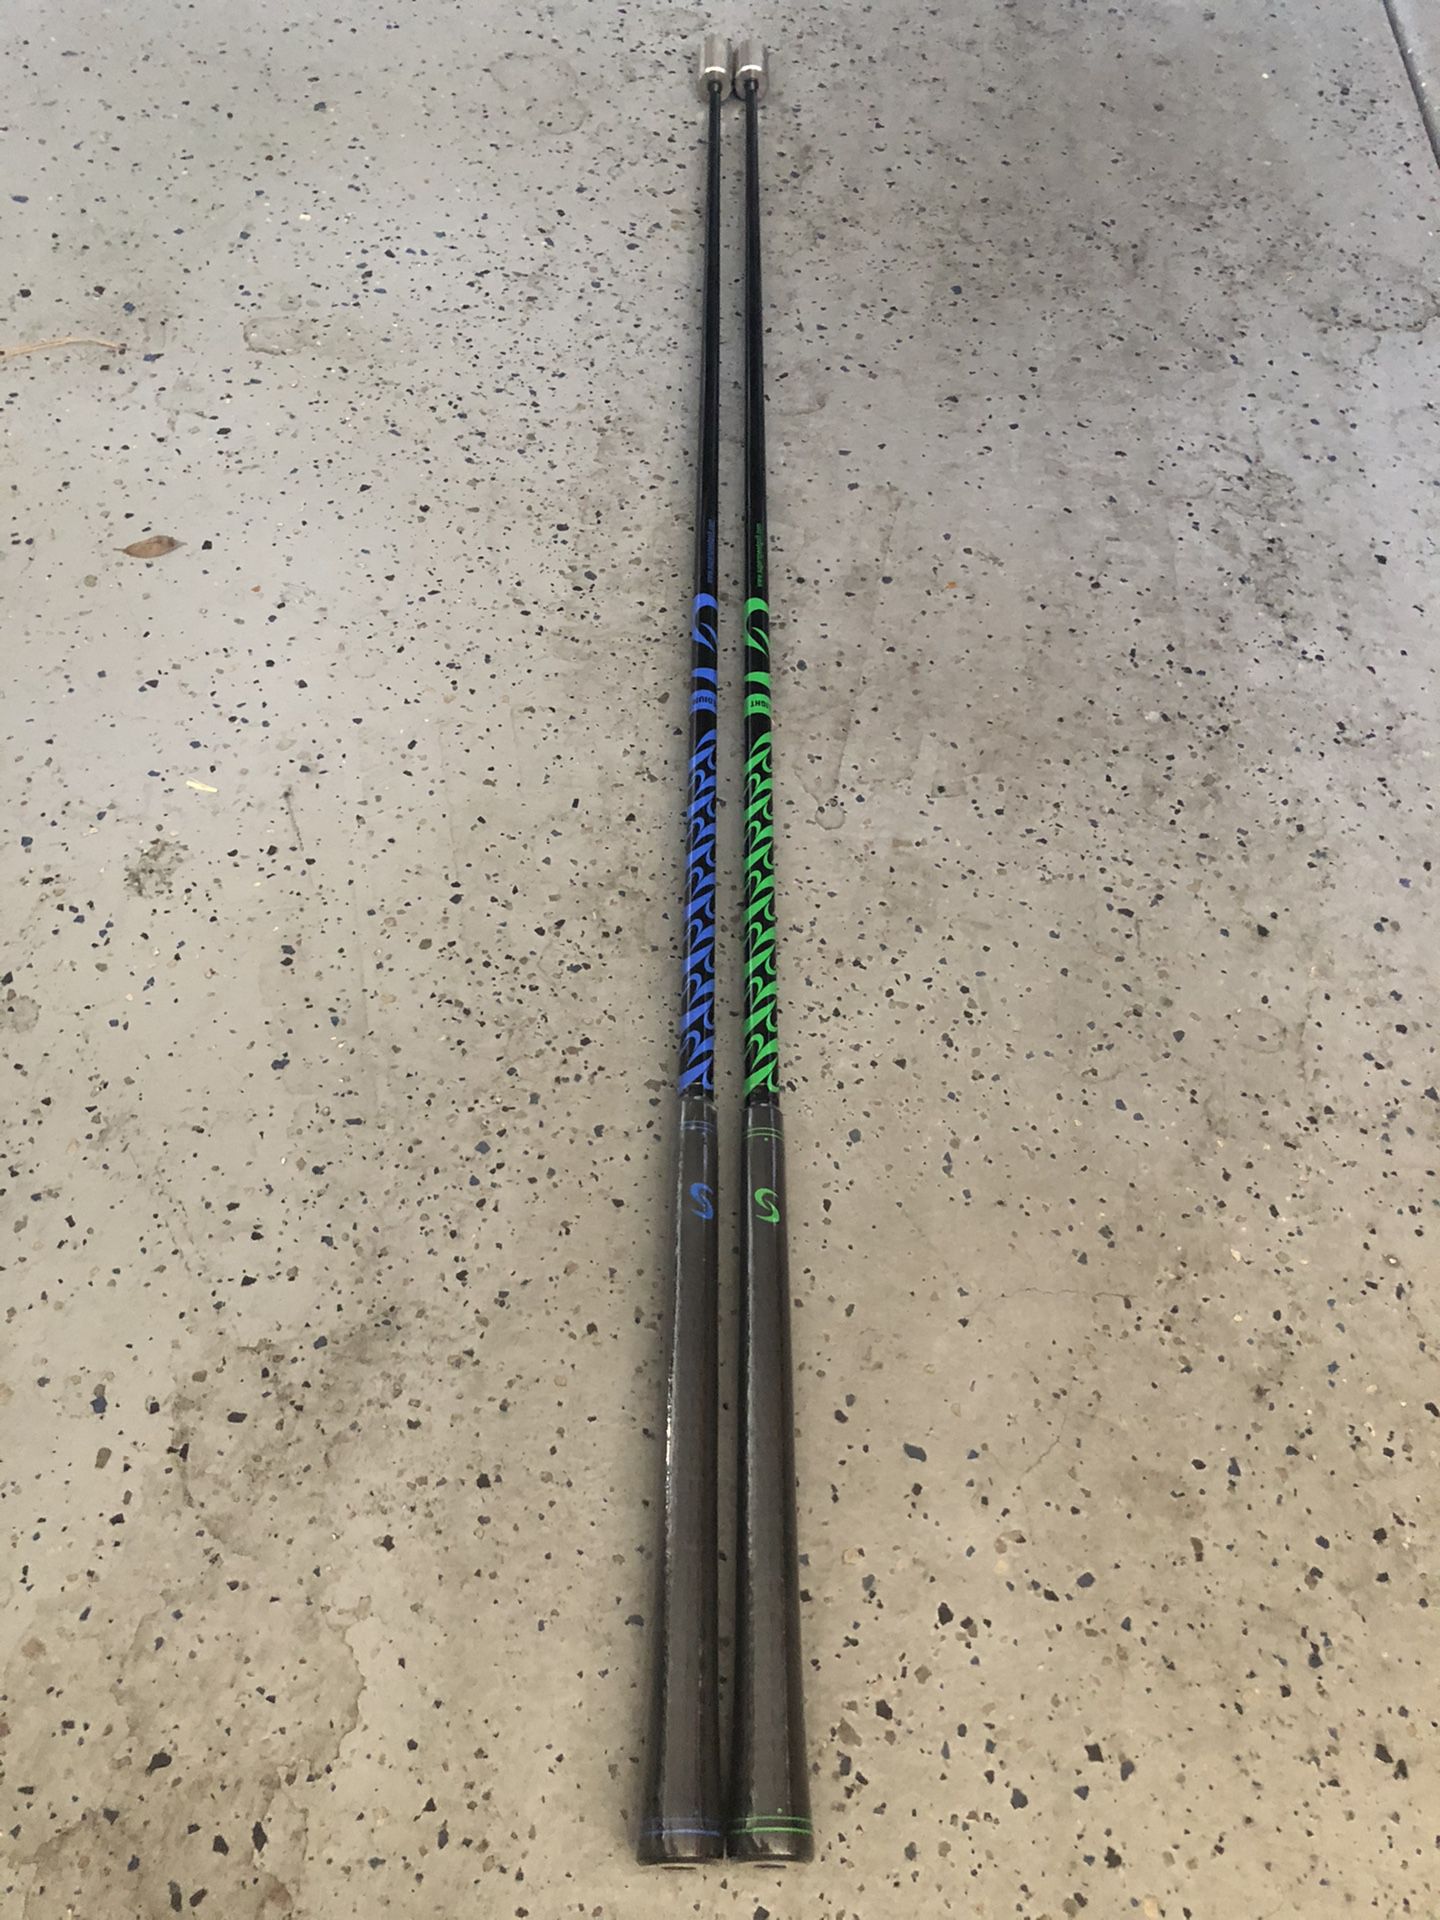 Brand new Weighted Swing Club